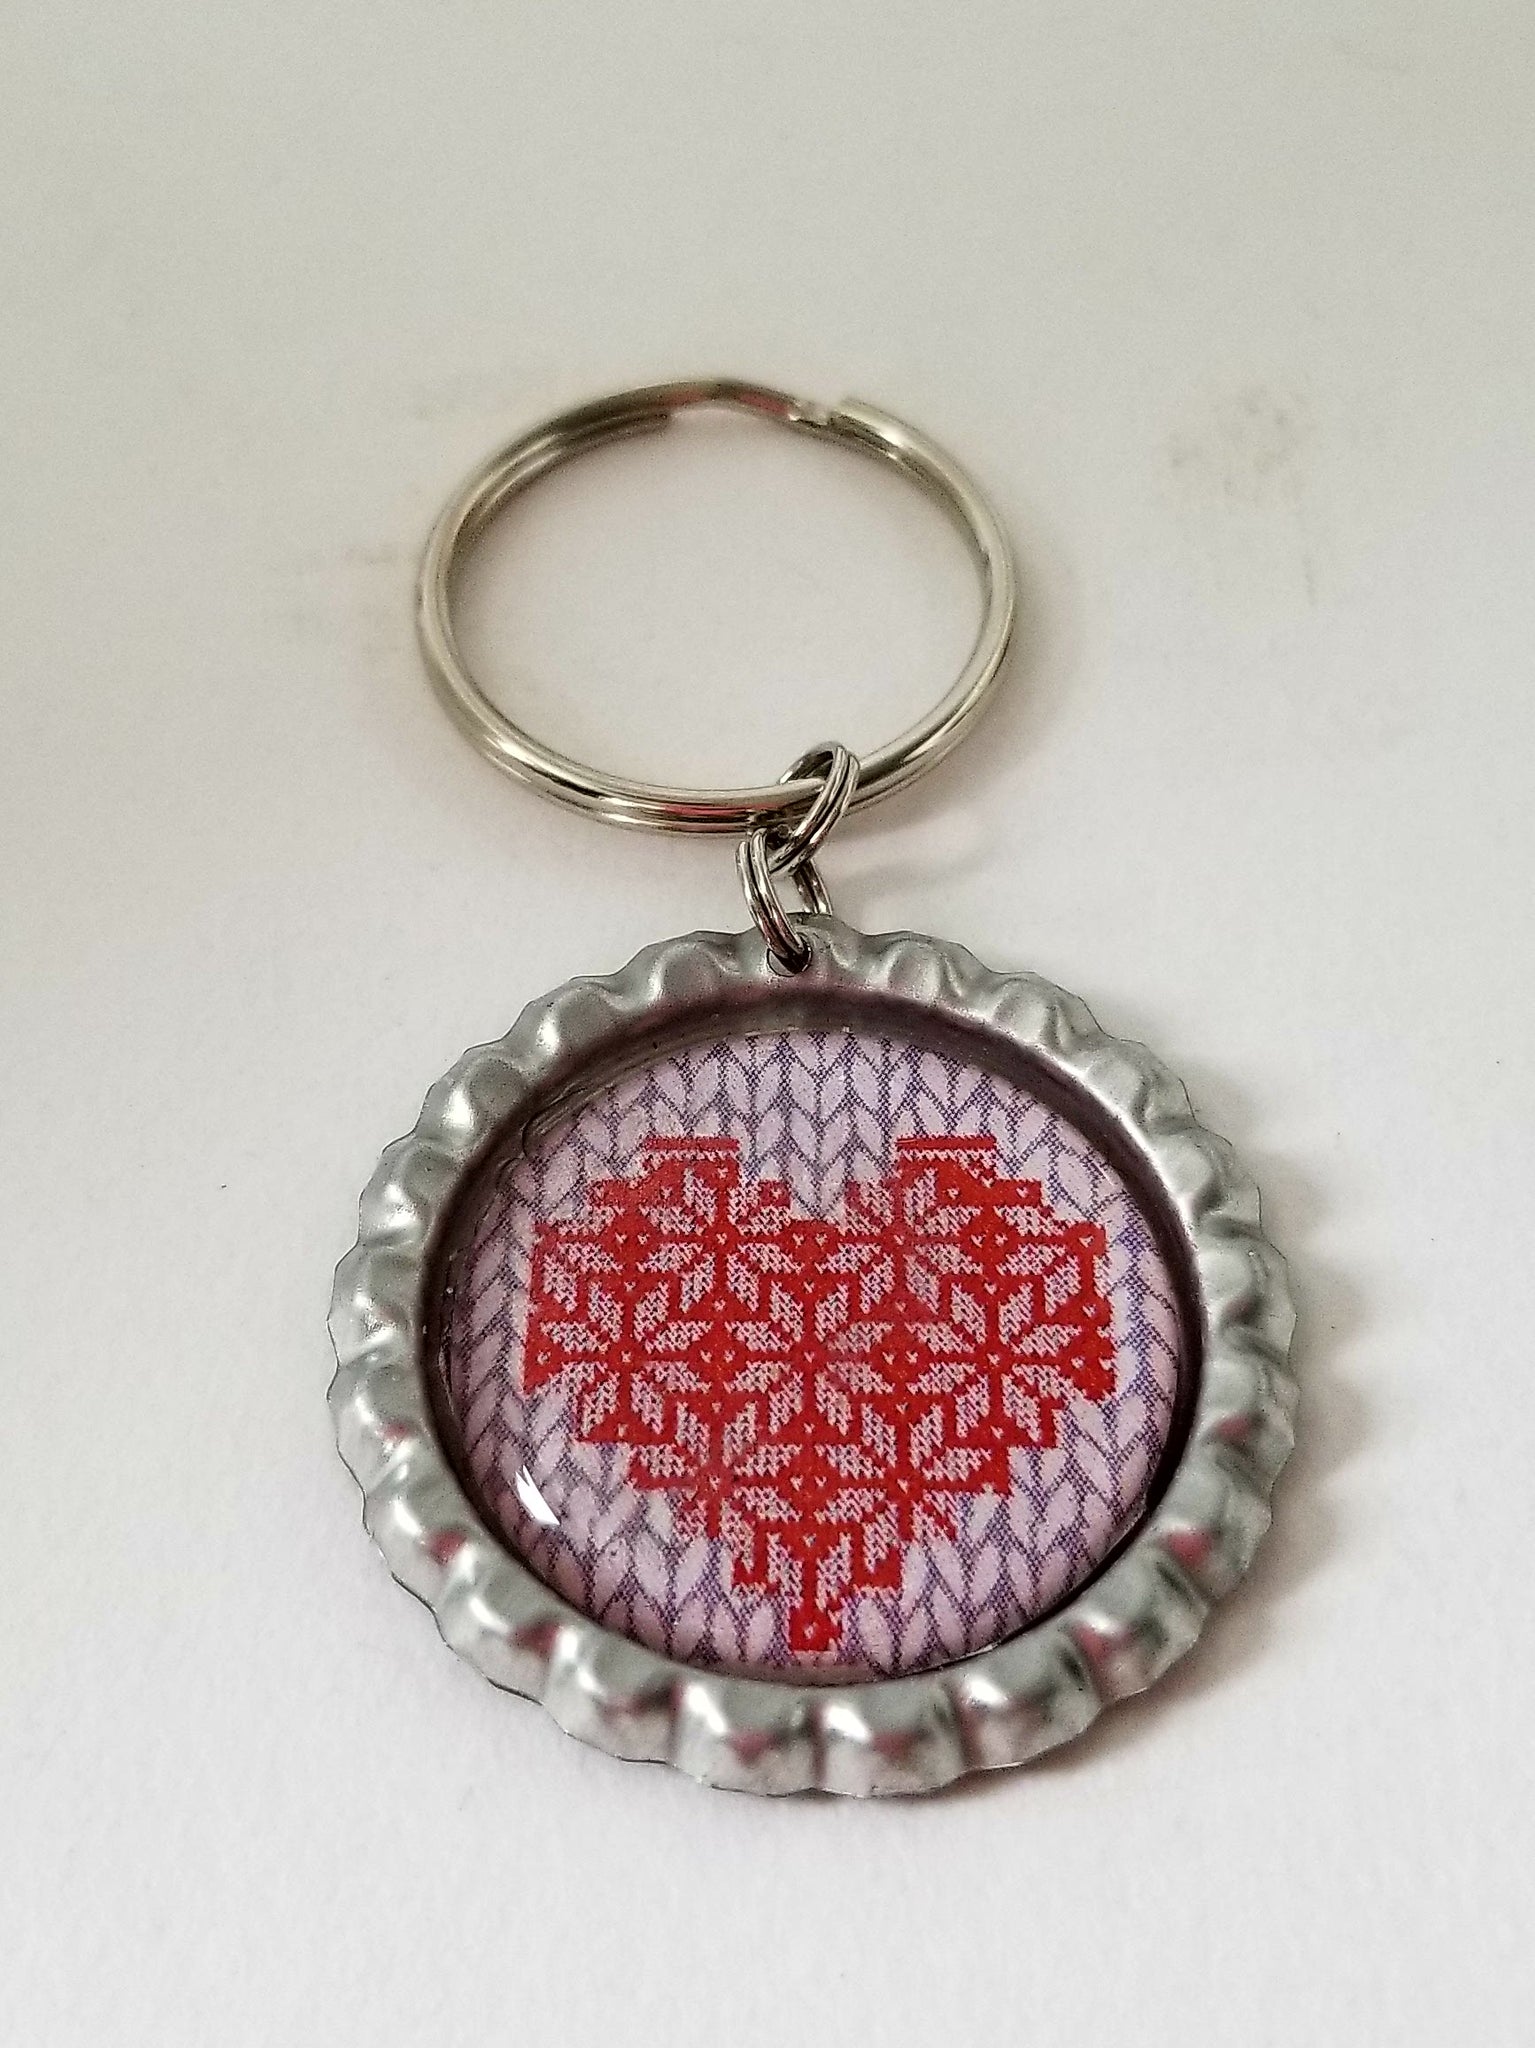 Red Heart Key Chain